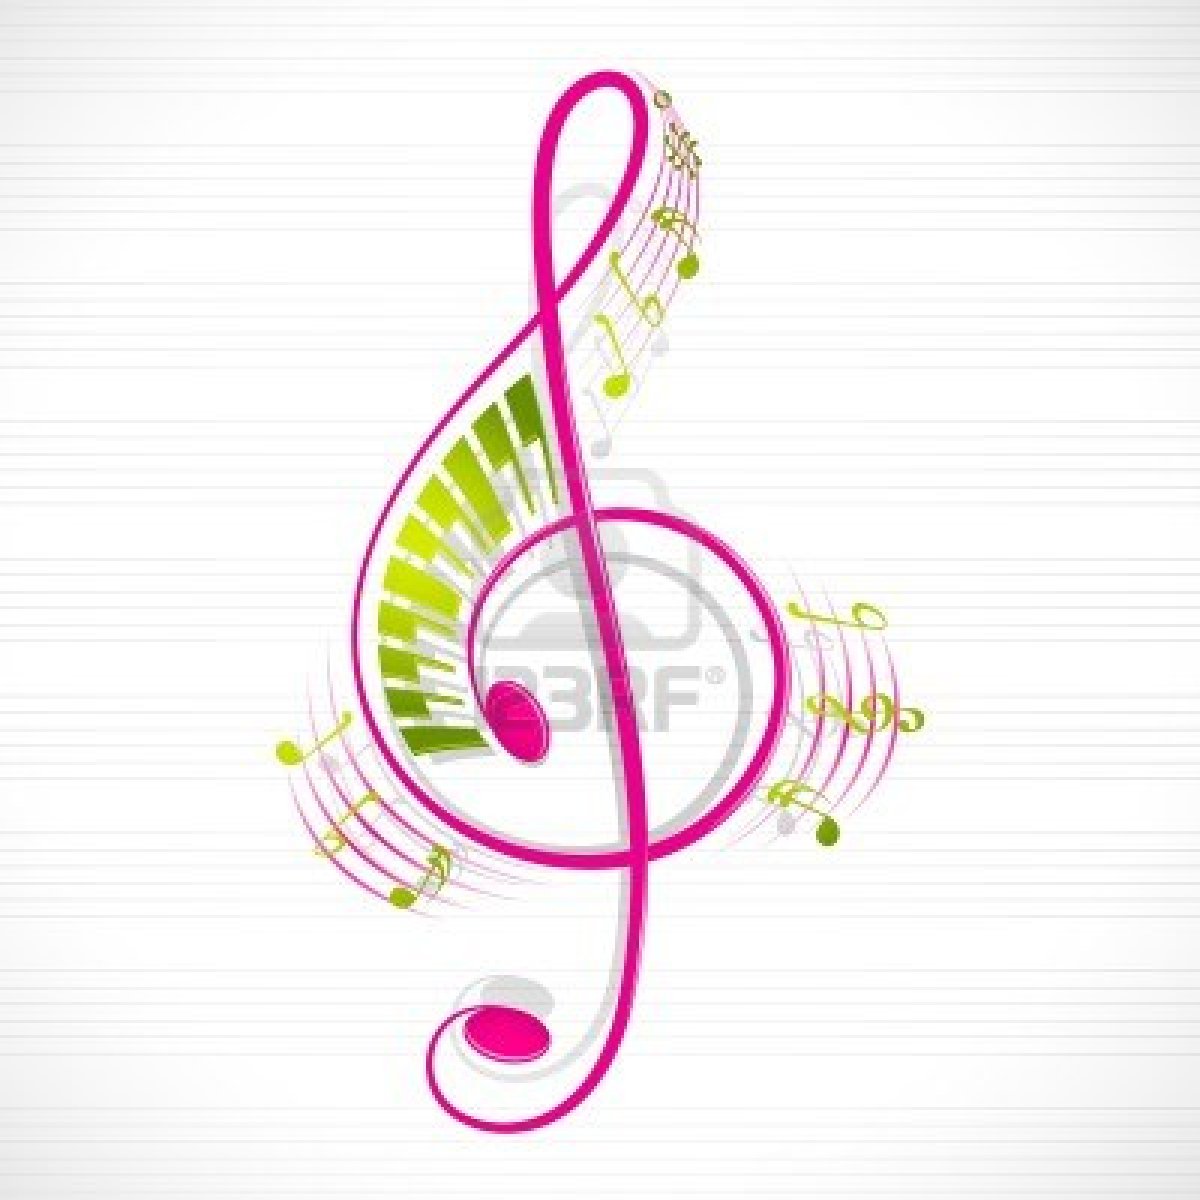 Colorful Music Notes Symbols Colorful Music Notes Vector Illustration